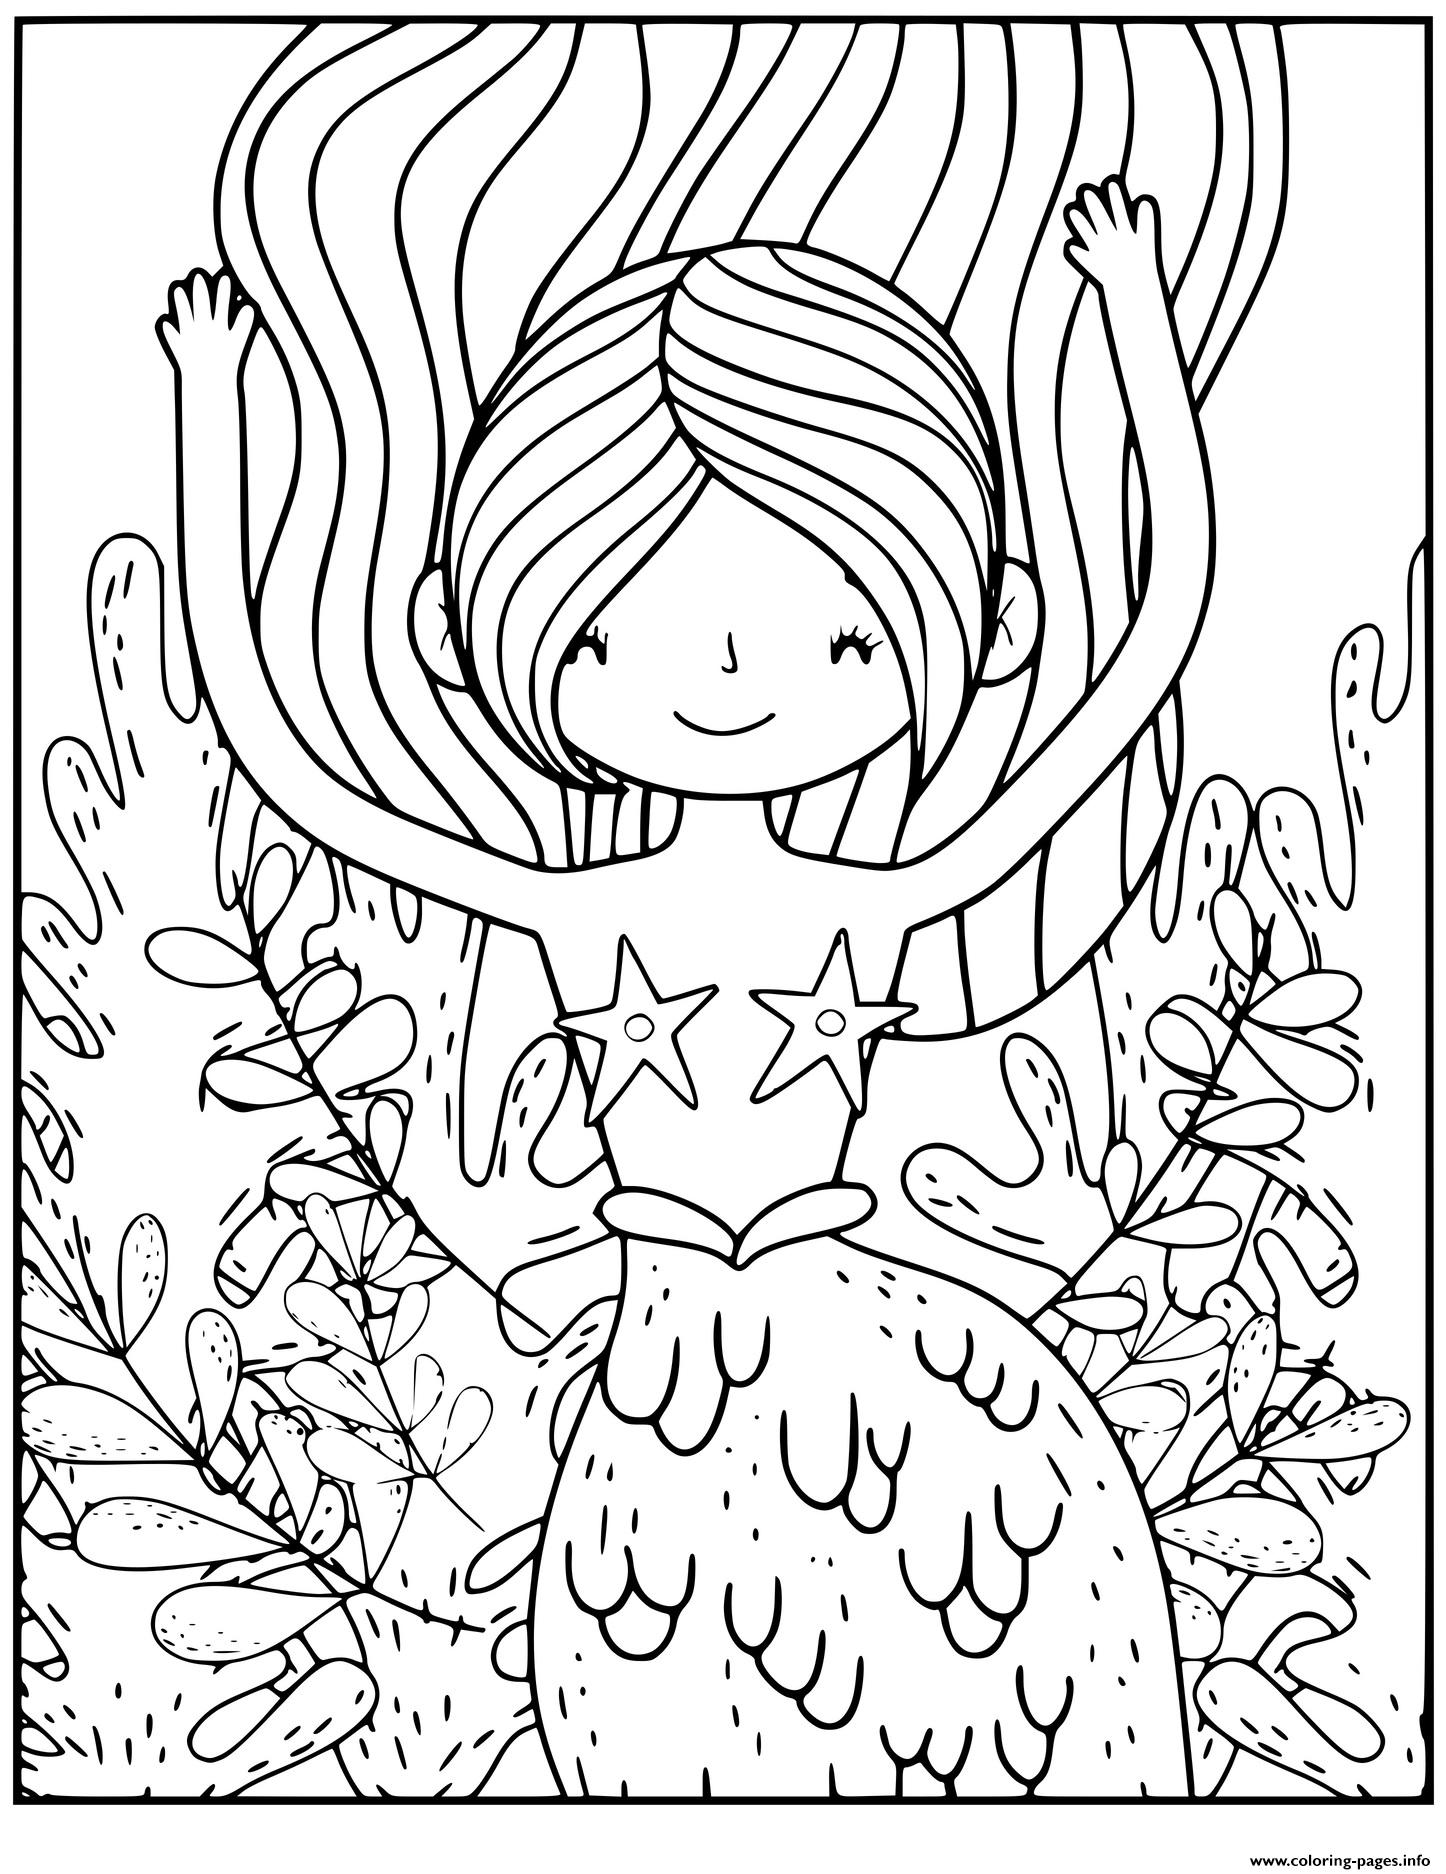 Cute Girl Mermaid Doing Yoga For Fun Coloring Pages Printable